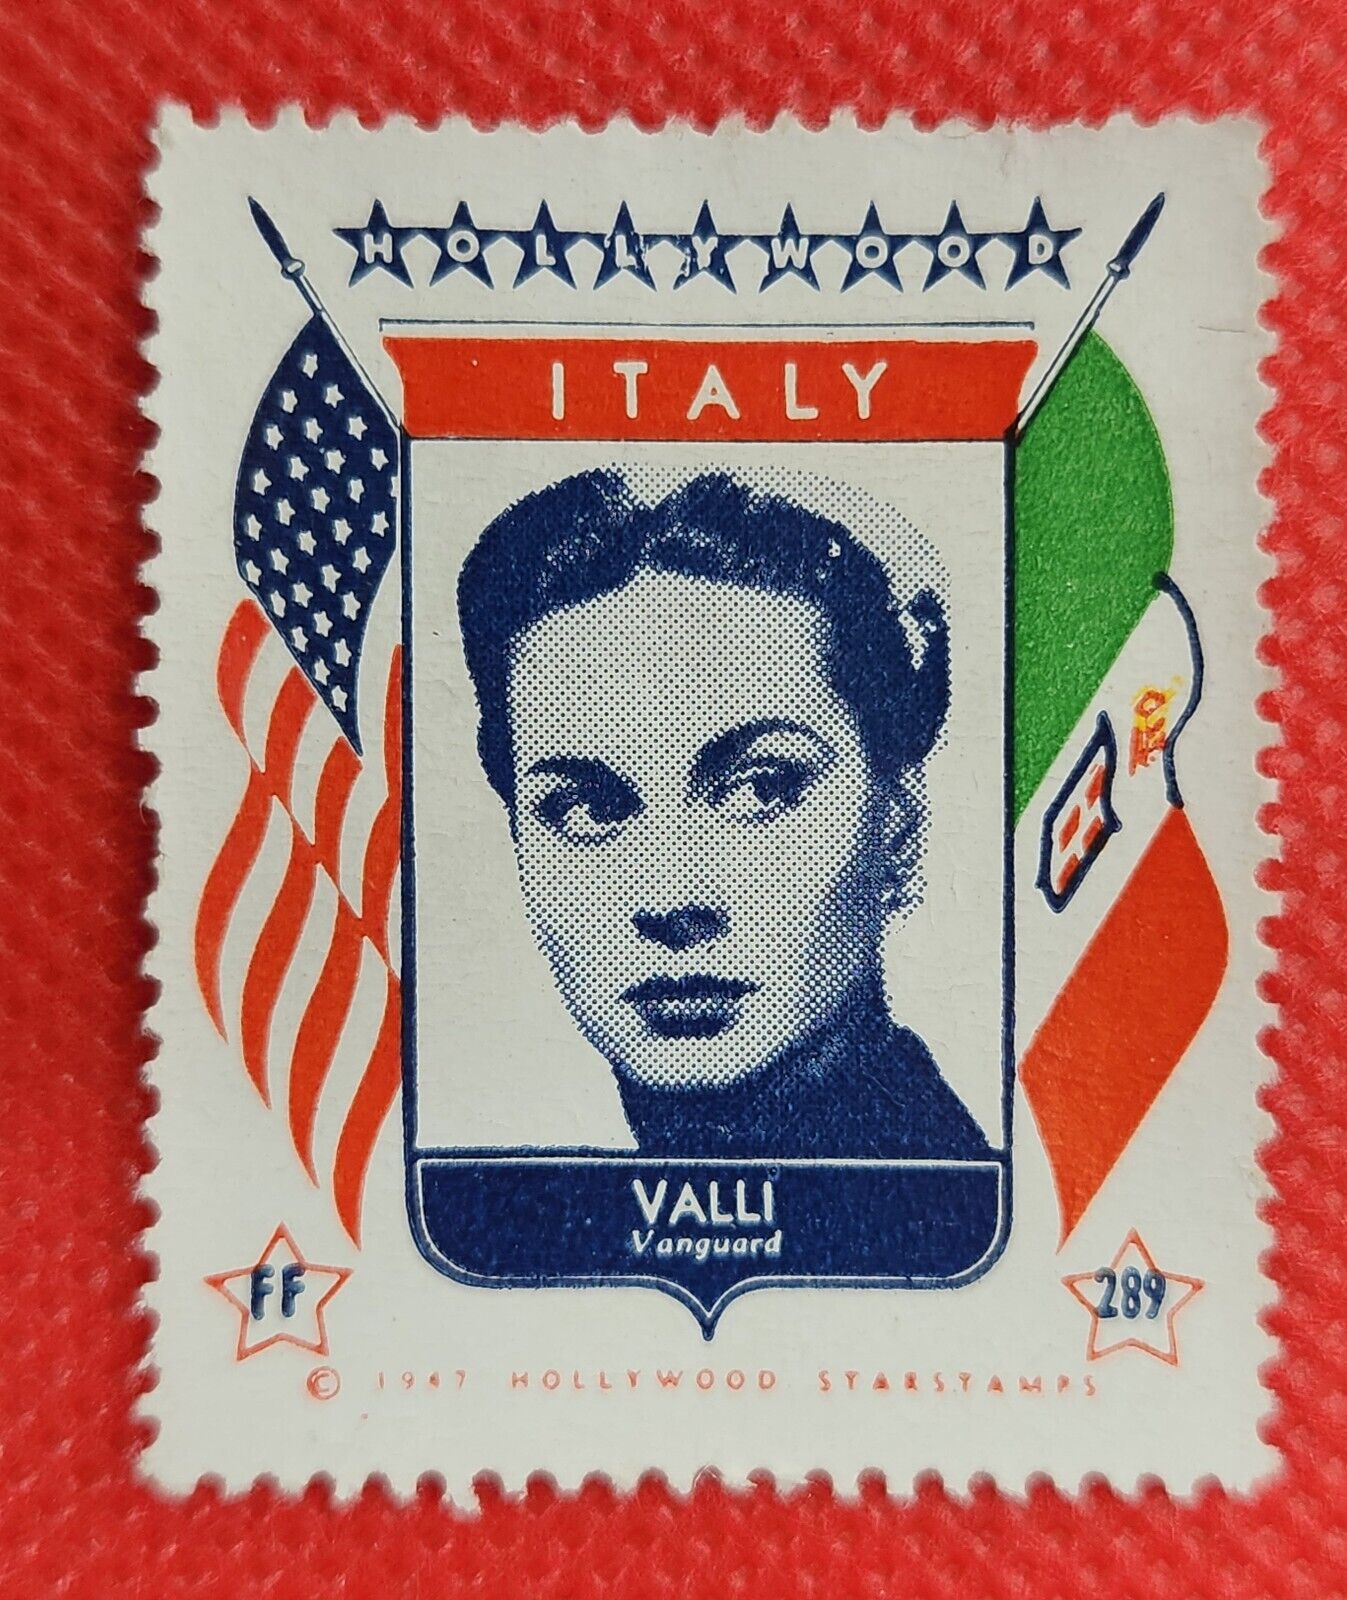 Valli Italy 1947 Hollywood Screen Movie Stars Stamp Trading Card